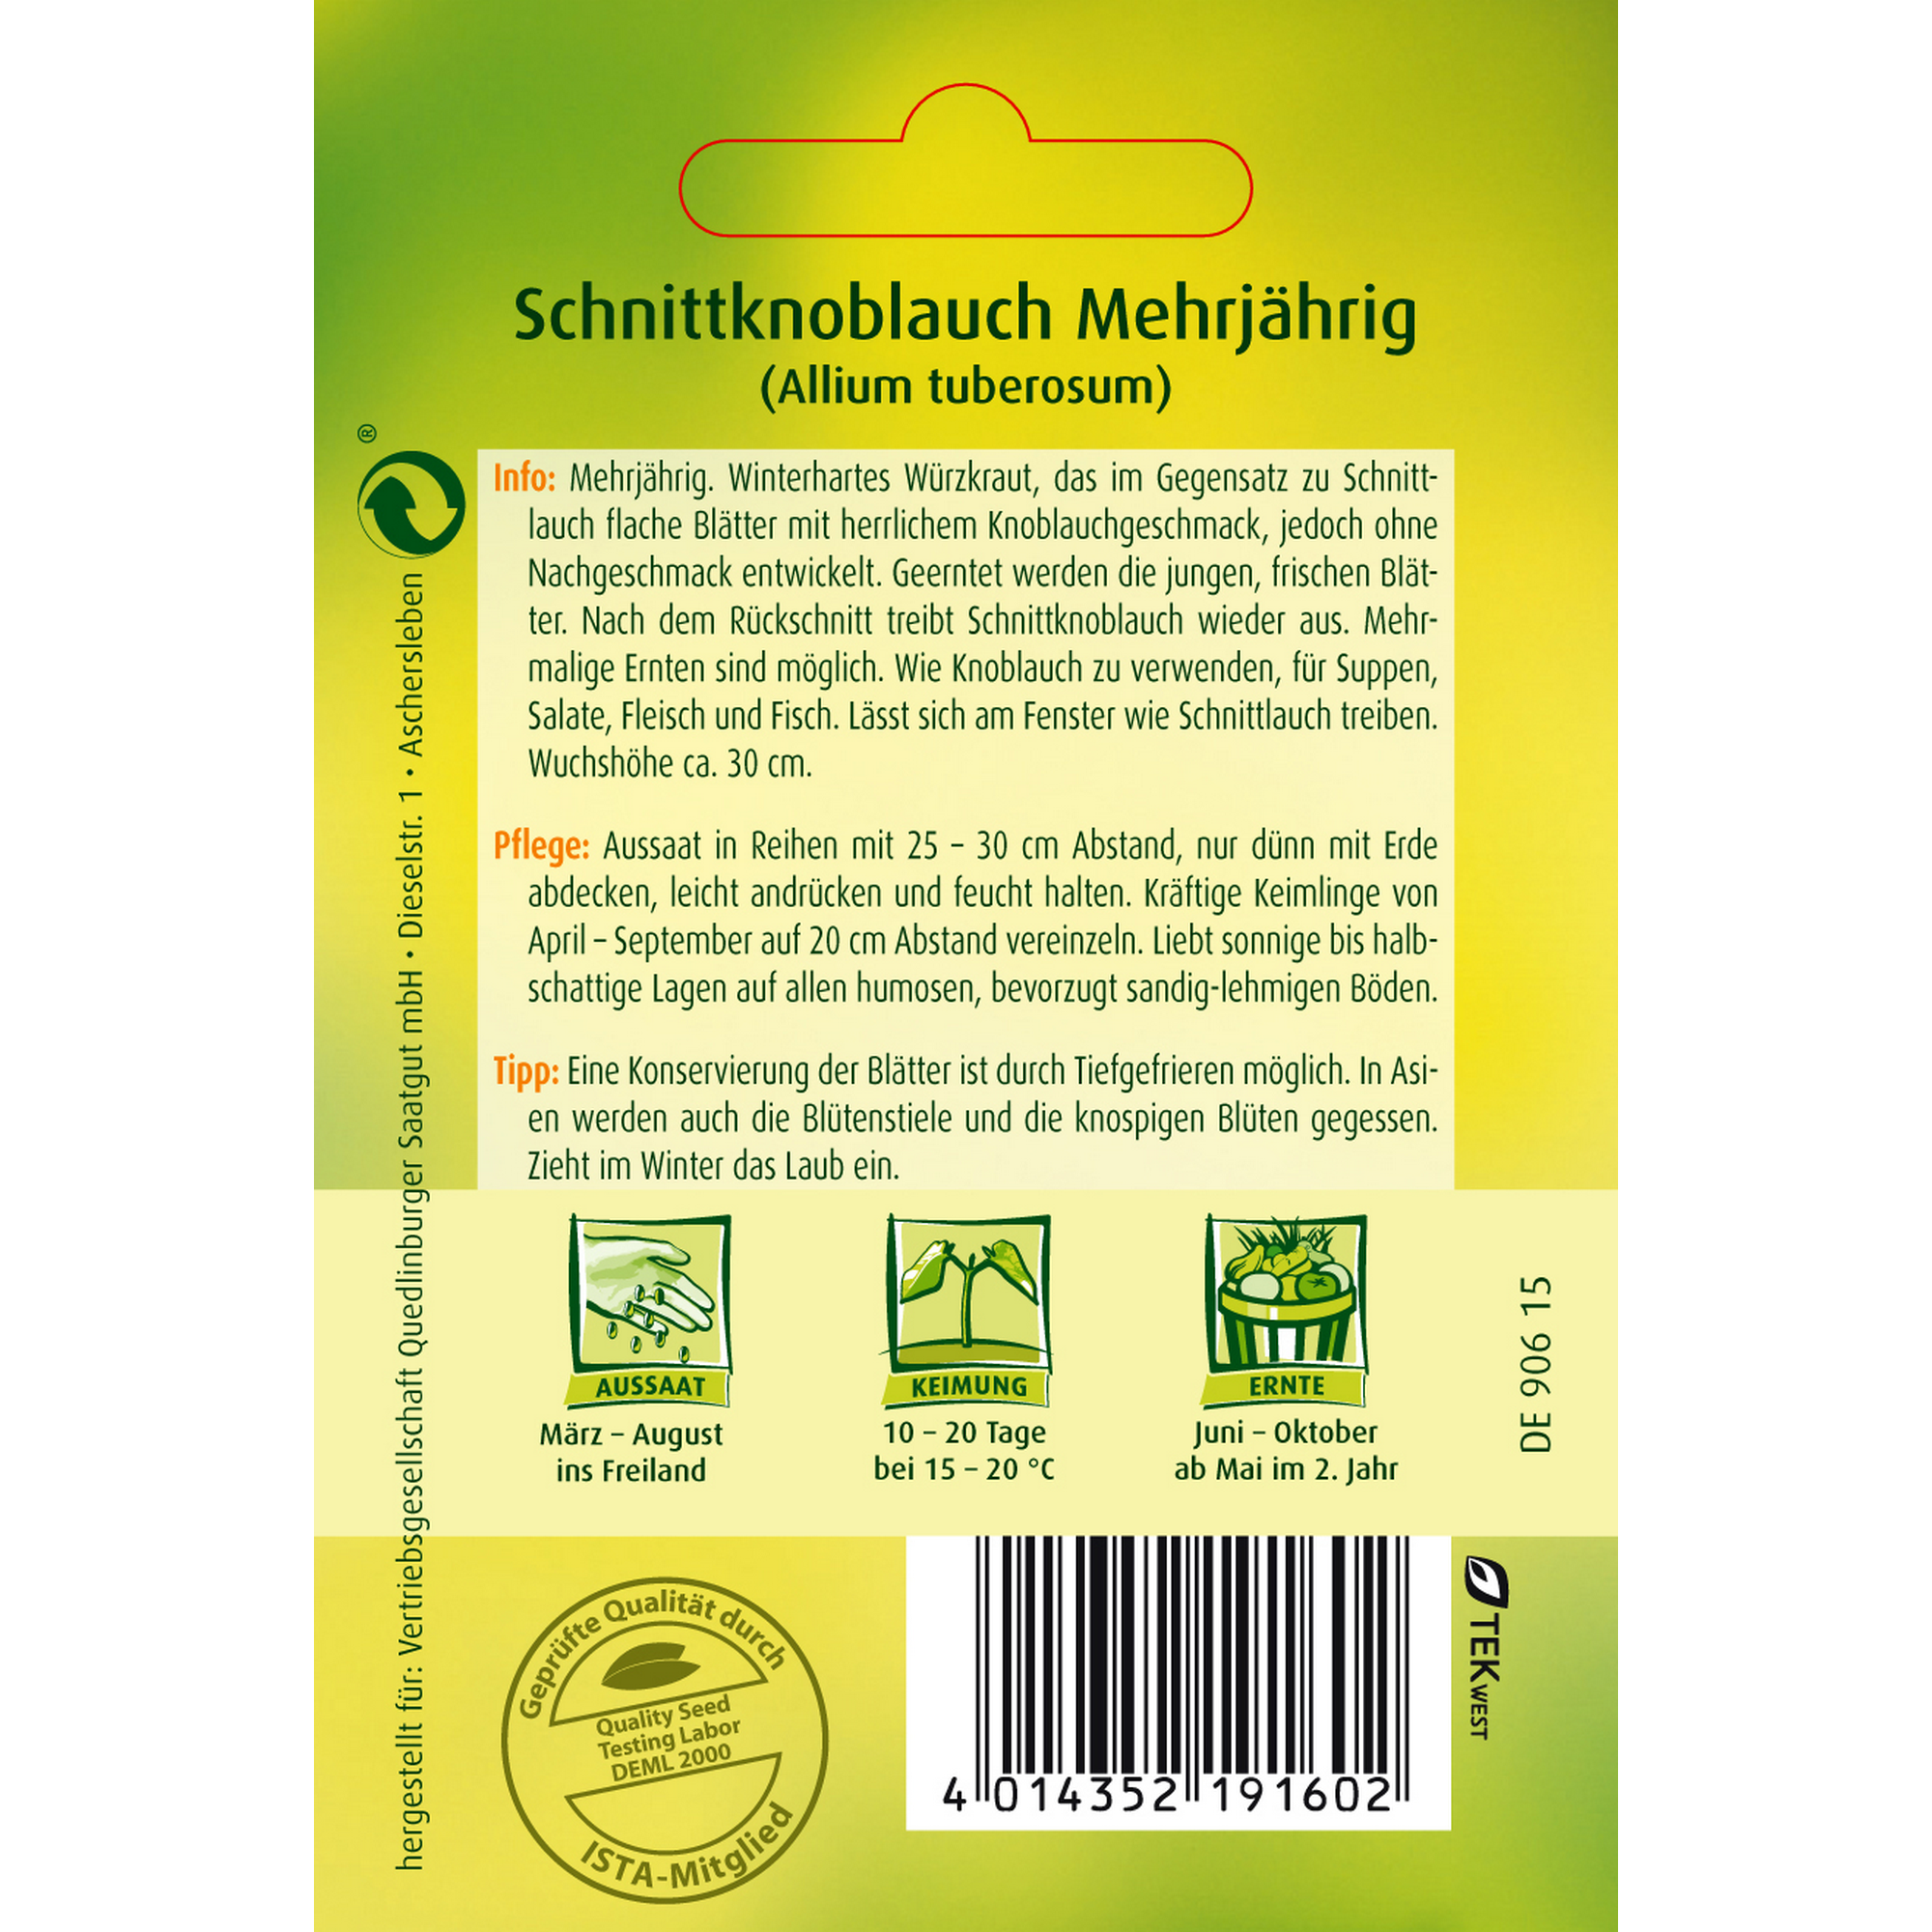 Schnittknoblauch + product picture